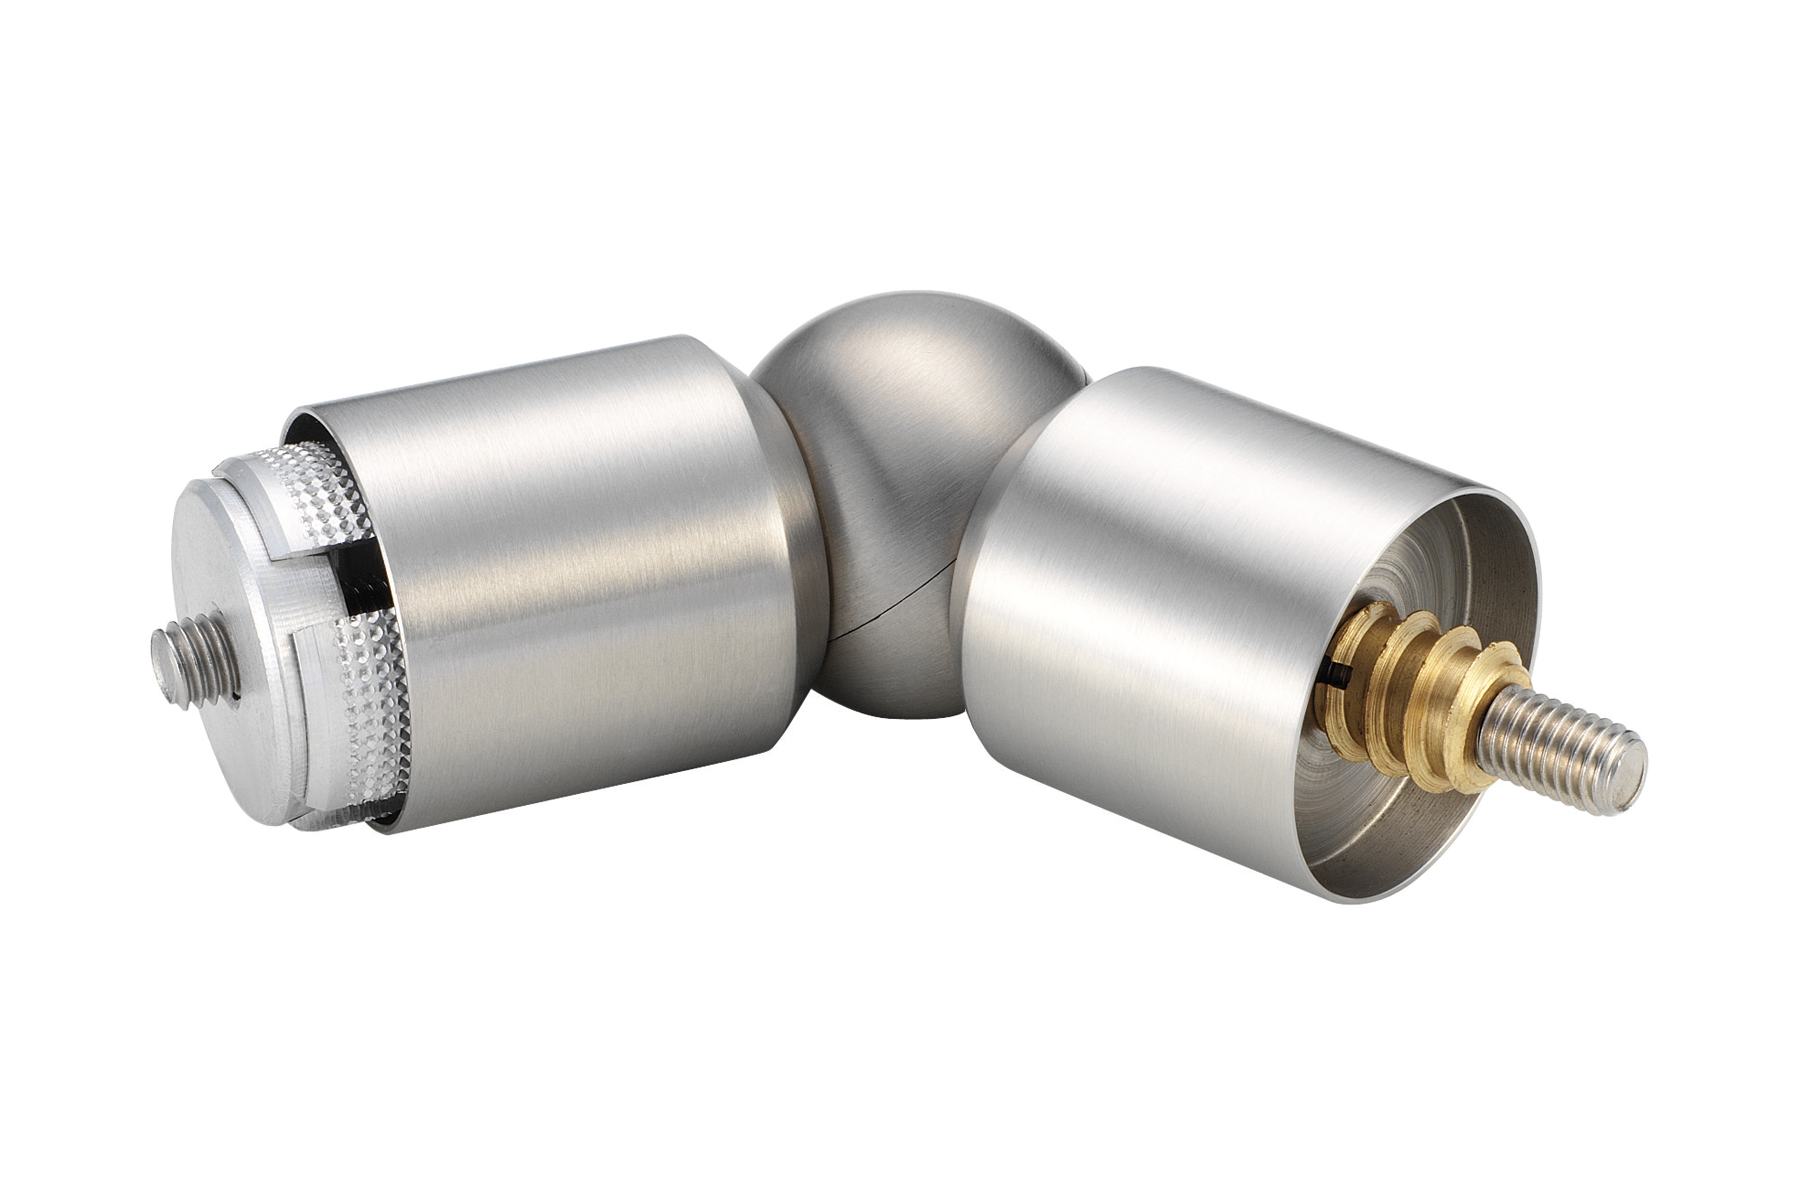 KWS 7K73 Ball-and-socket-joint in finish 82 (stainless steel, matte)